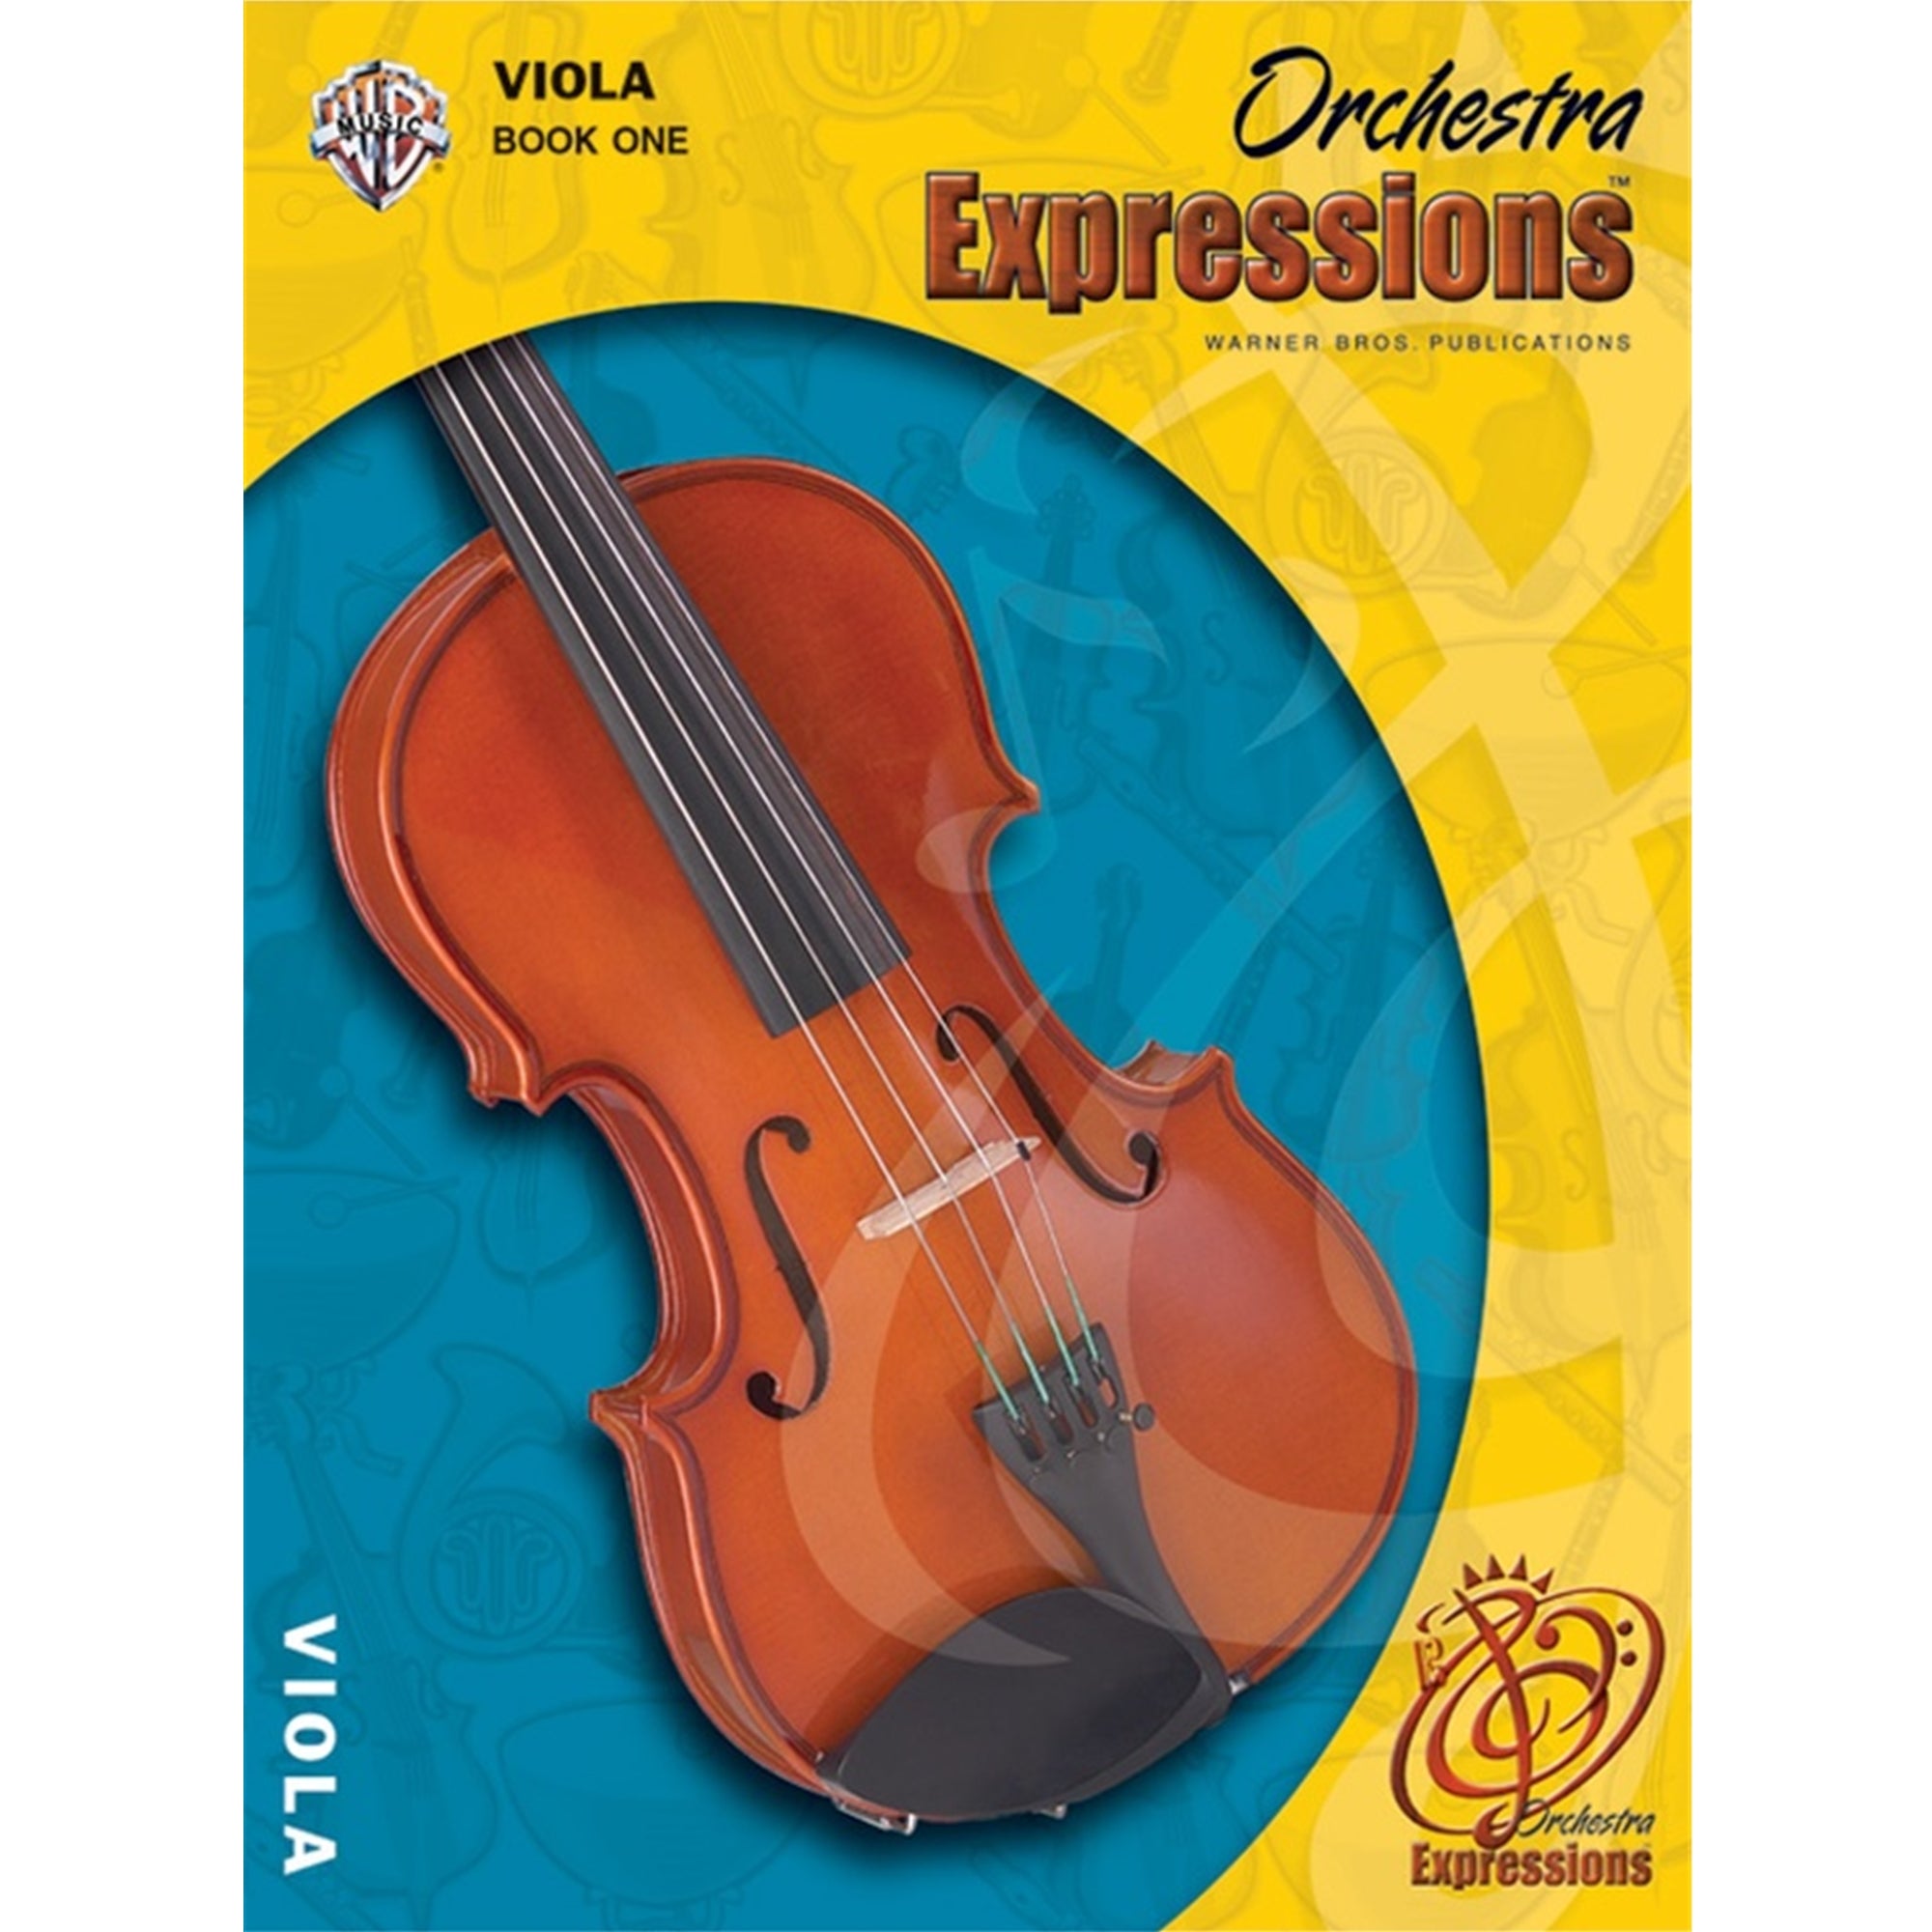 ALFRED 00EMCO1003CD Orchestra Expressions, Book One: Viola